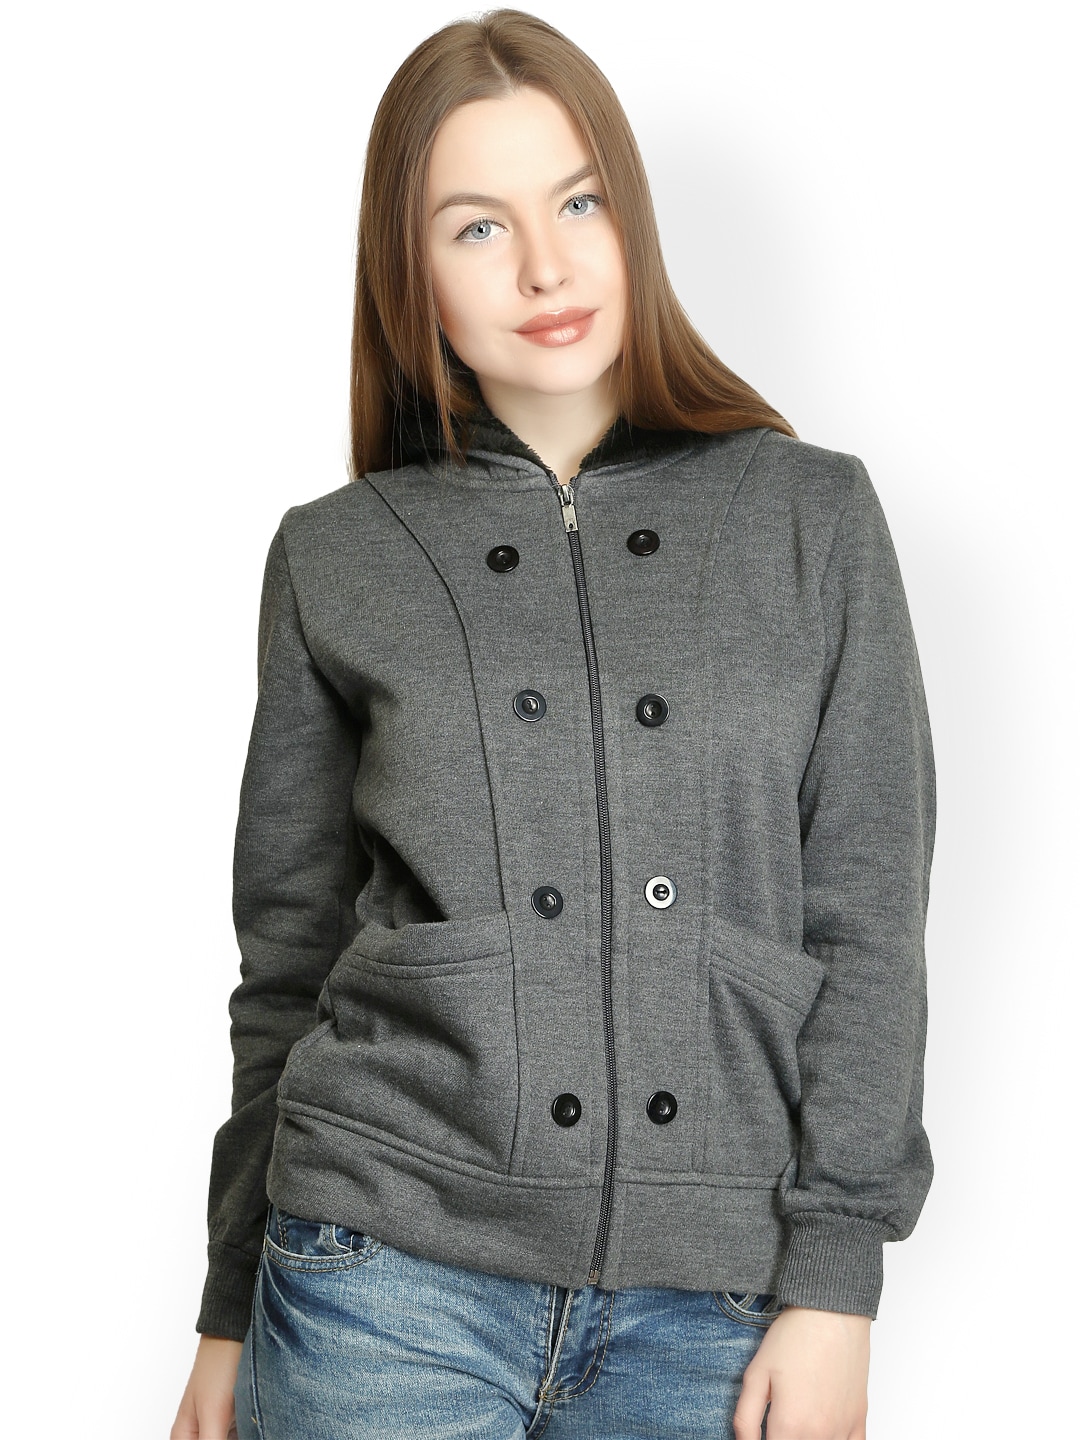 Belle Fille Women Grey Hooded Relaxed Fit Sweatshirt Price in India